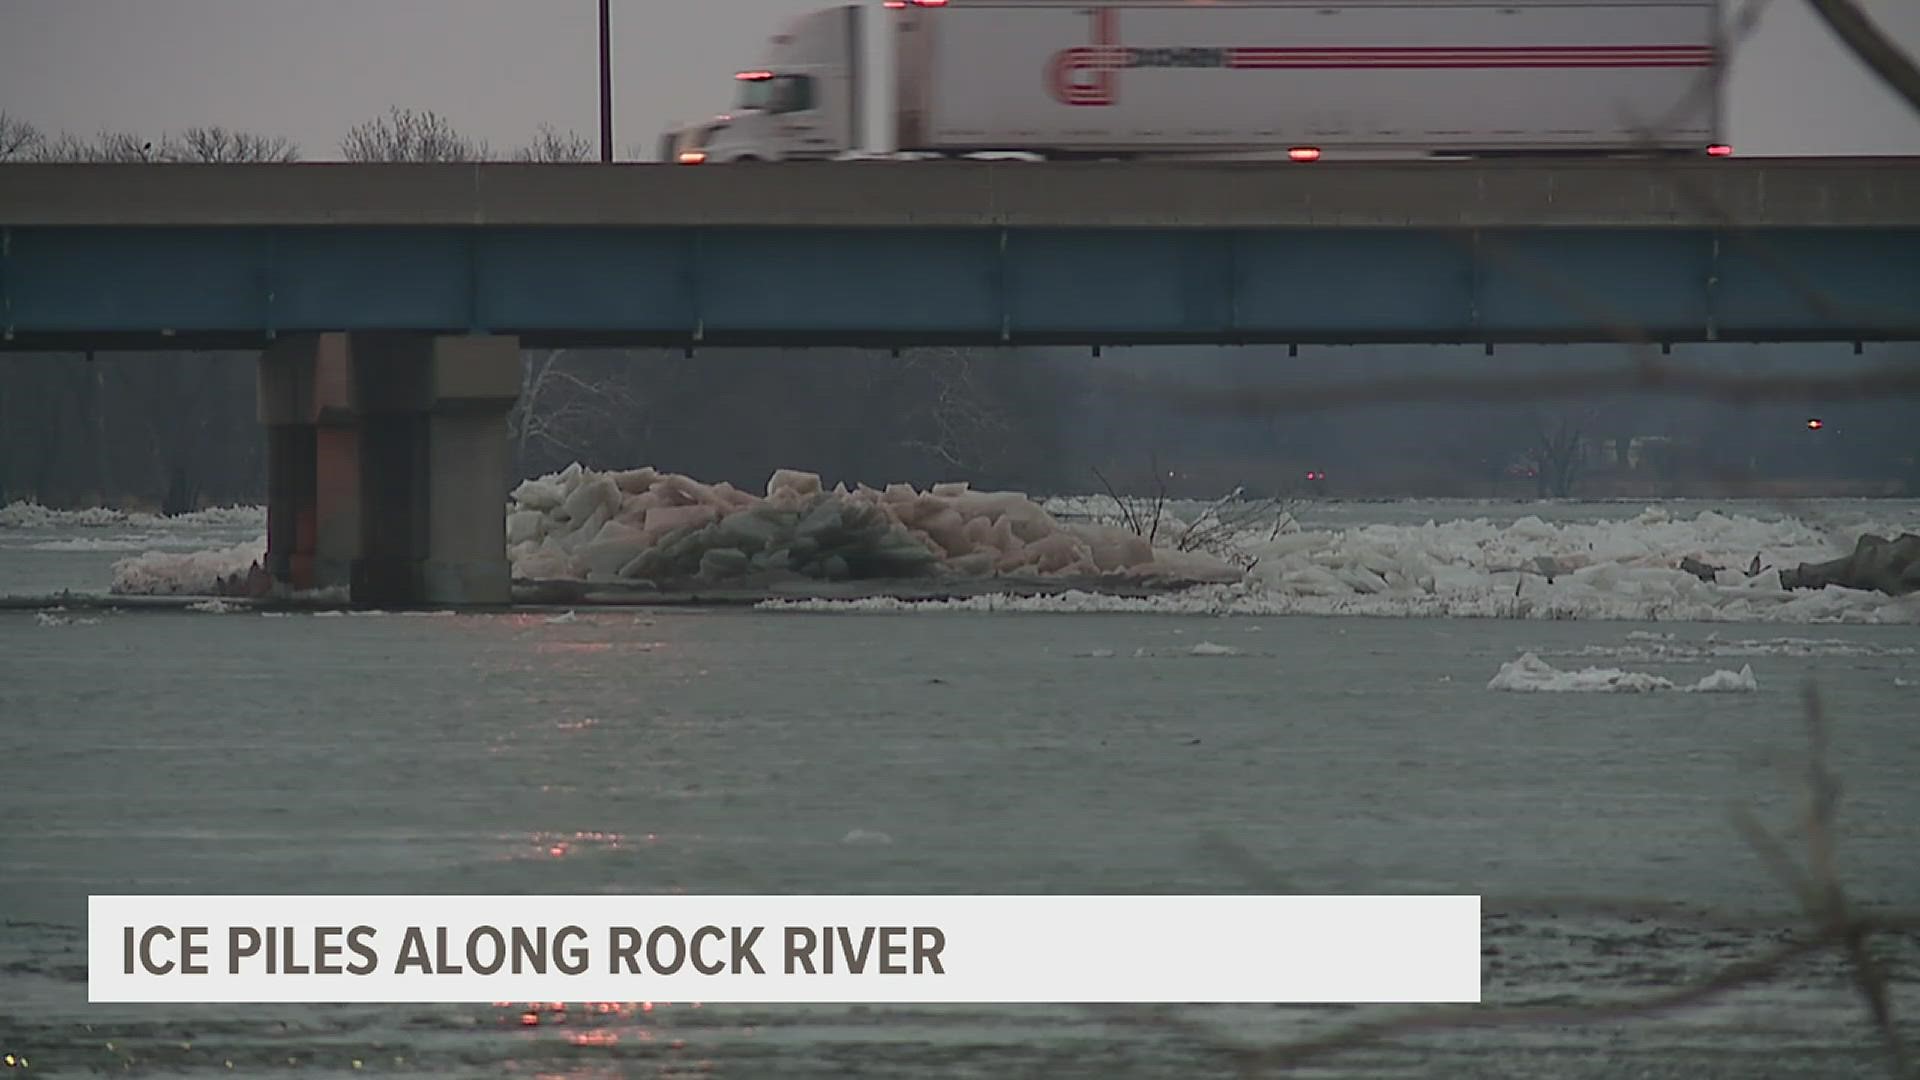 There aren't any problems with the ice piles right now, but if conditions continue, ice jams could form.